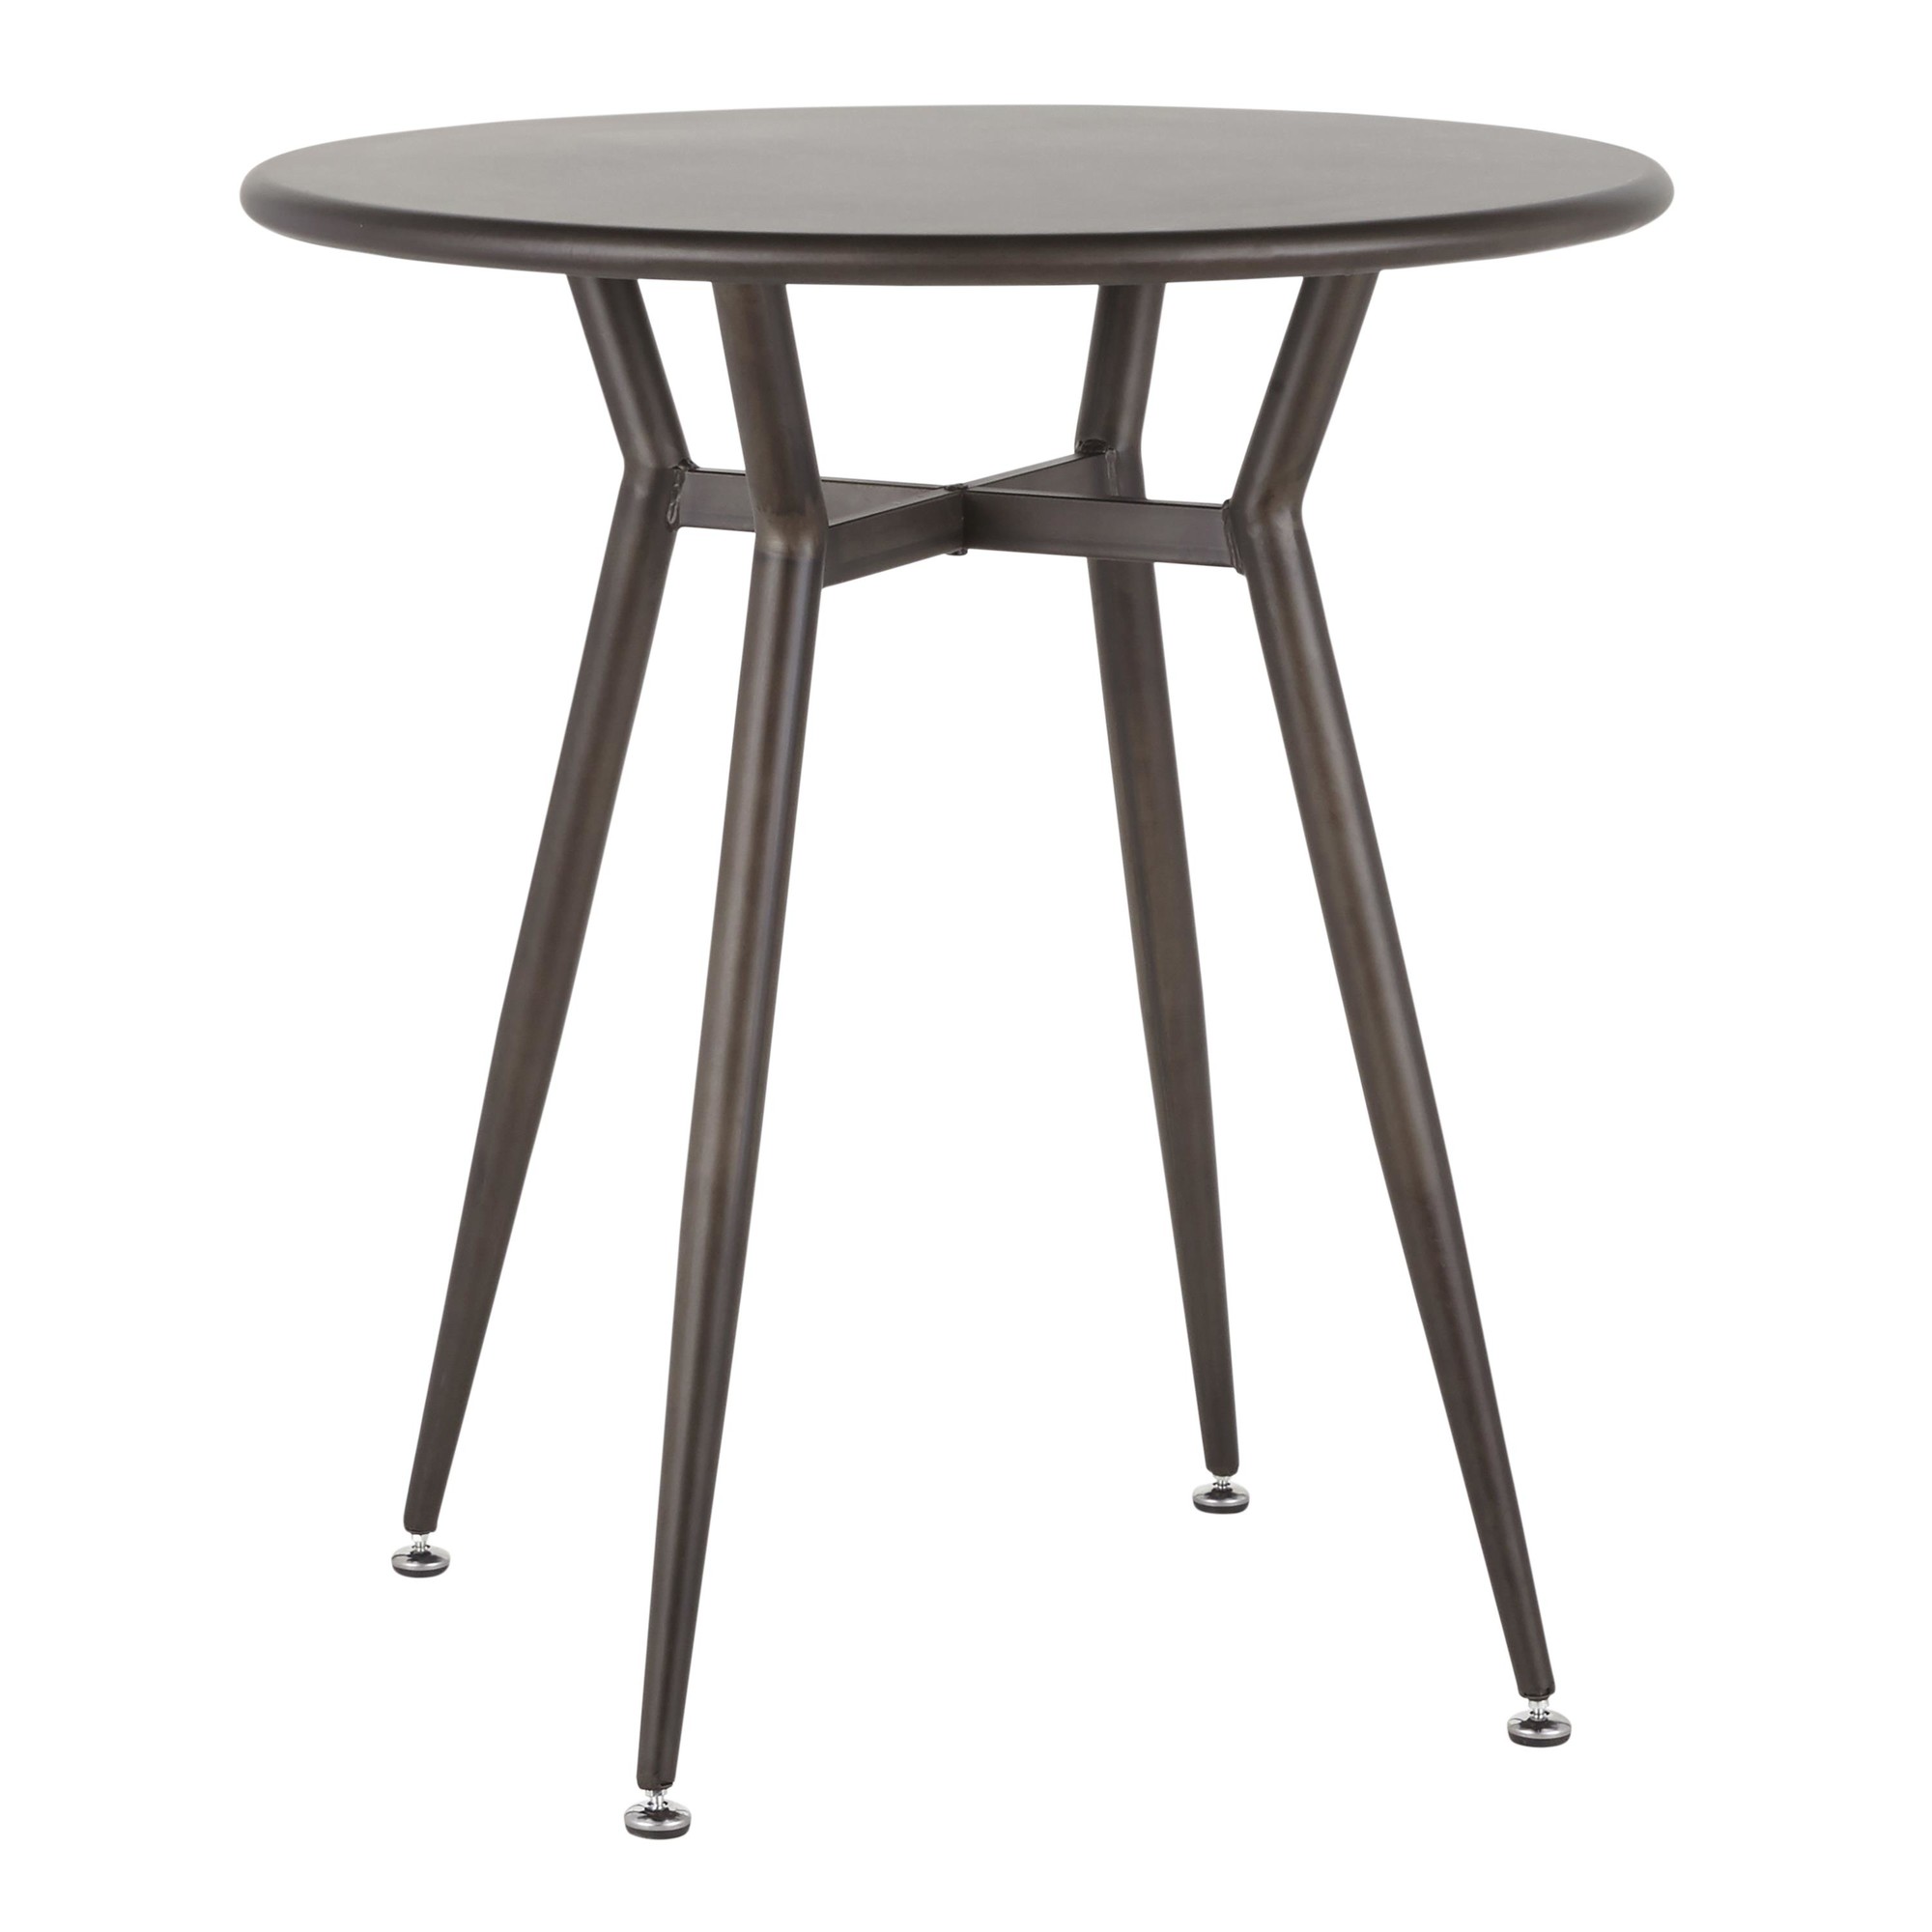 Clara Industrial Round Dinette Table in Antique Metal - Lumisource DT-CLARARN AN